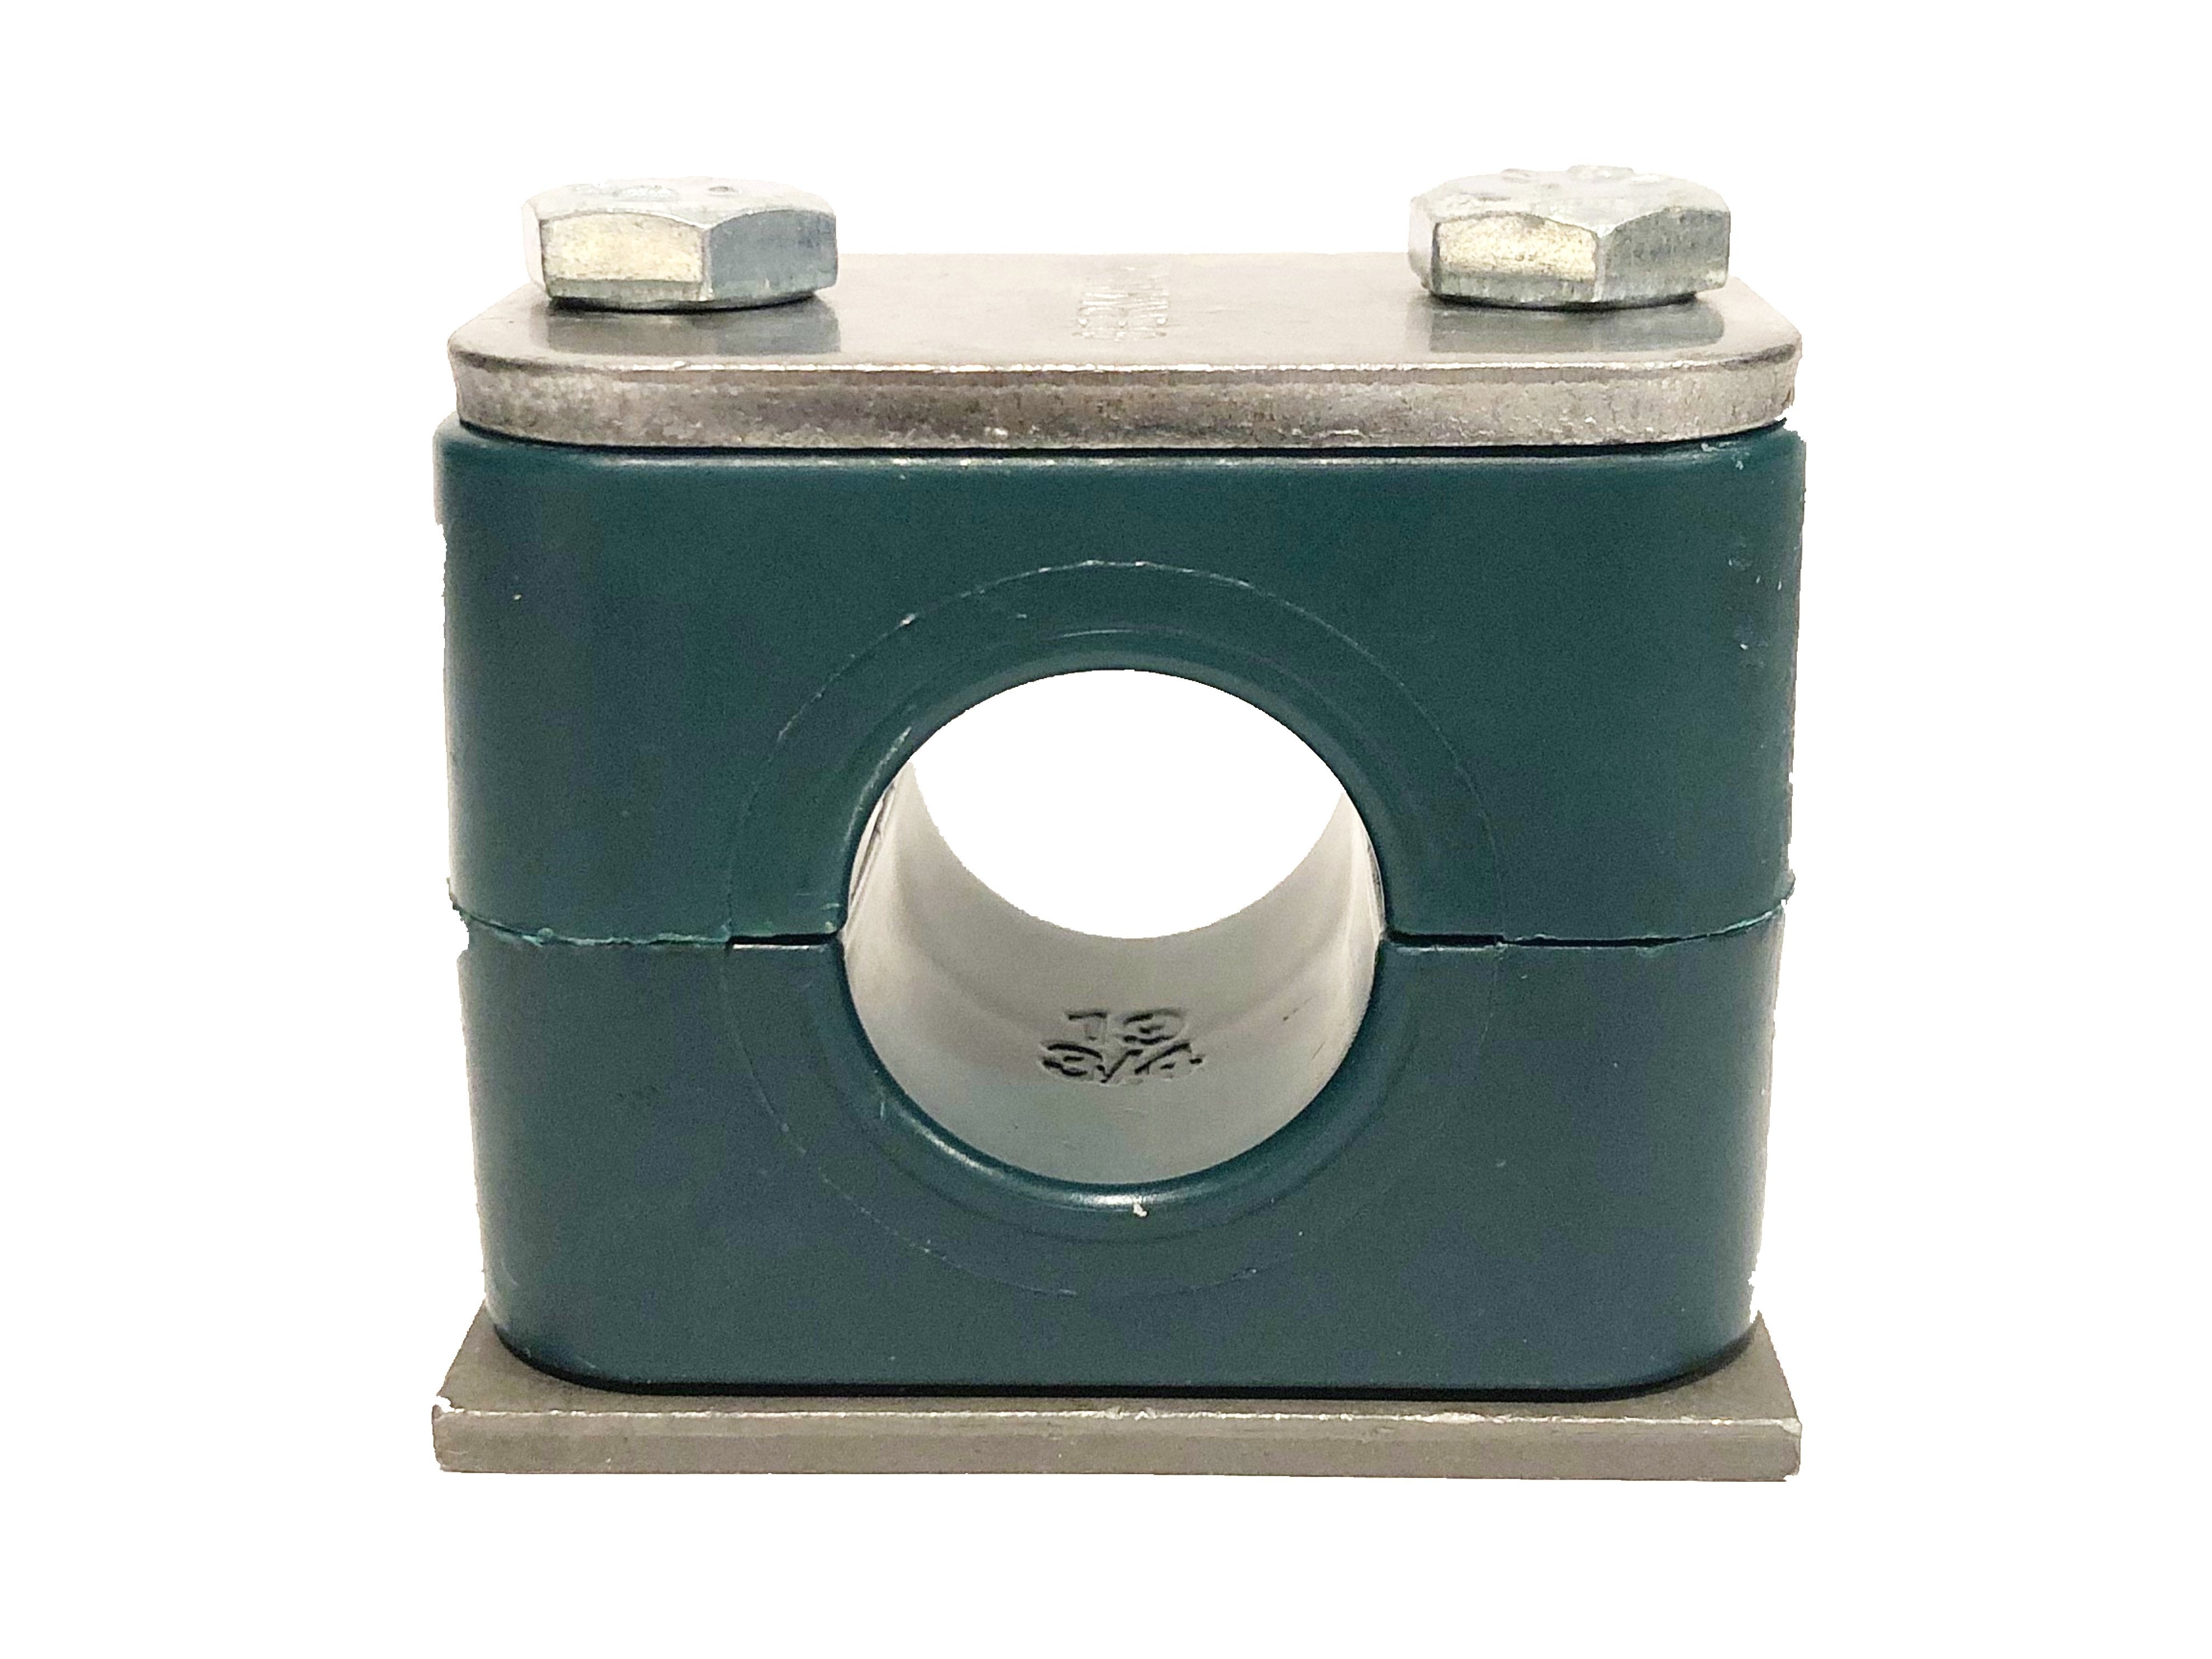 SP-648.3-PP-H-DP-AS-U-W10 : Stauff Clamp, Single Weld Plate, 1.9" (48.3mm) OD, for 1.5" Pipe, Green PP Insert, Smooth Interior, Carbon Steel